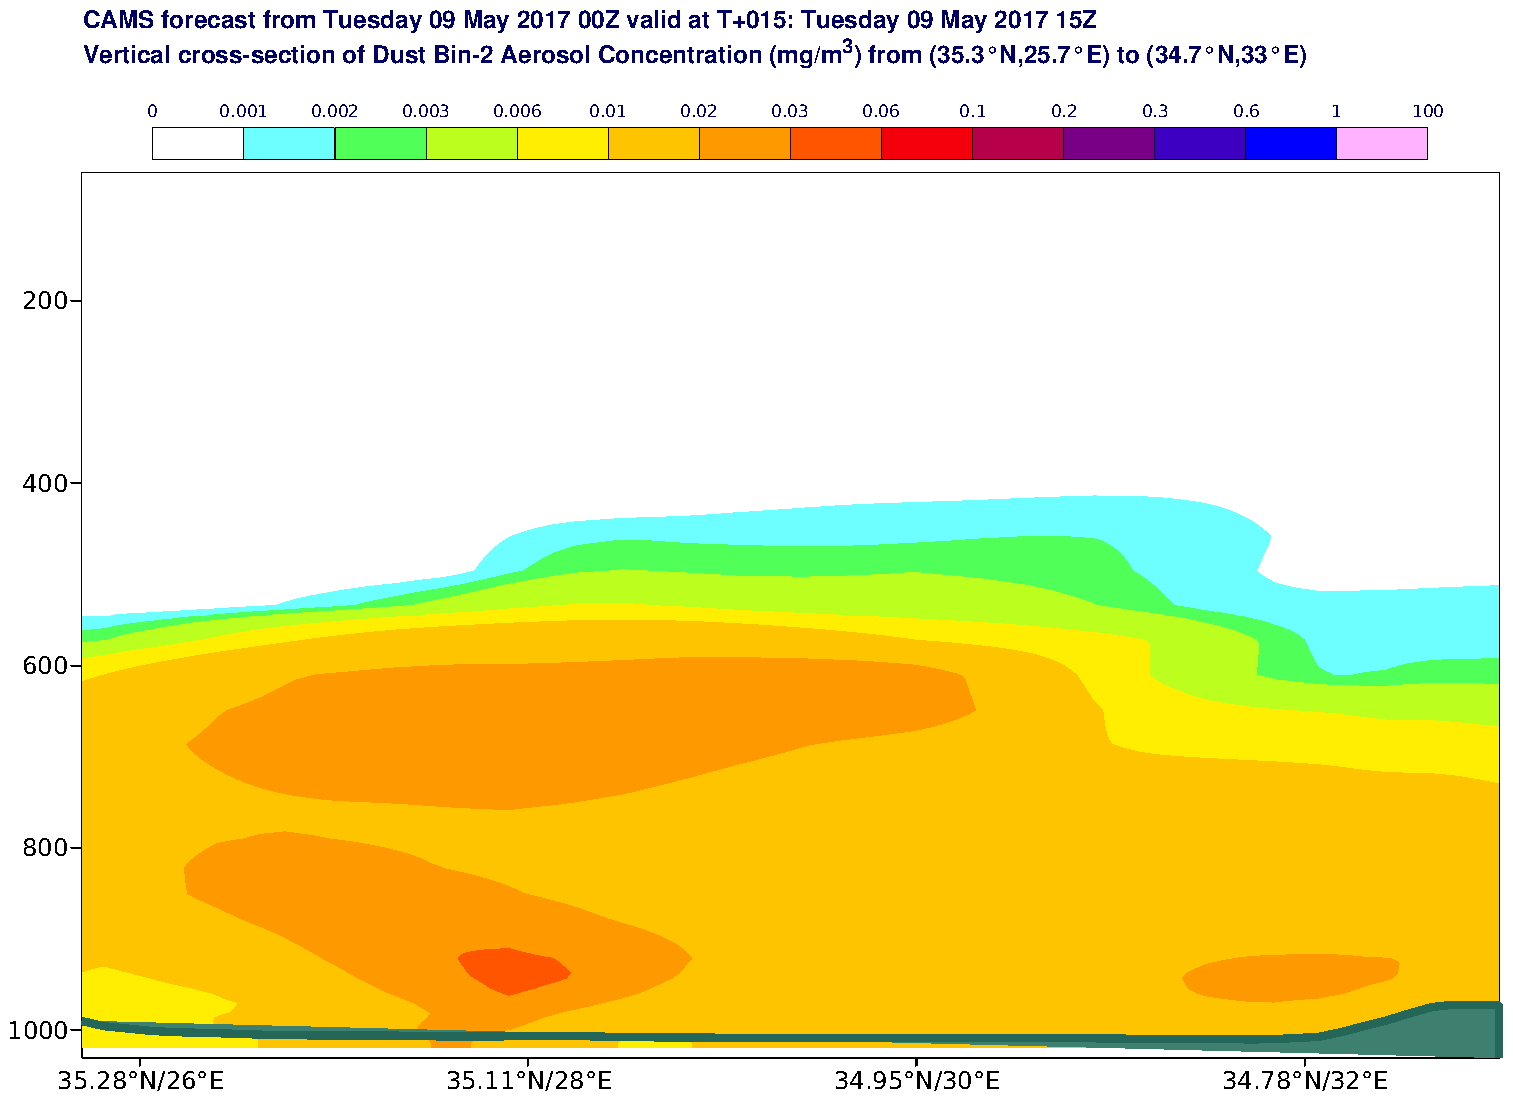 Vertical cross-section of Dust Bin-2 Aerosol Concentration (mg/m3) valid at T15 - 2017-05-09 15:00